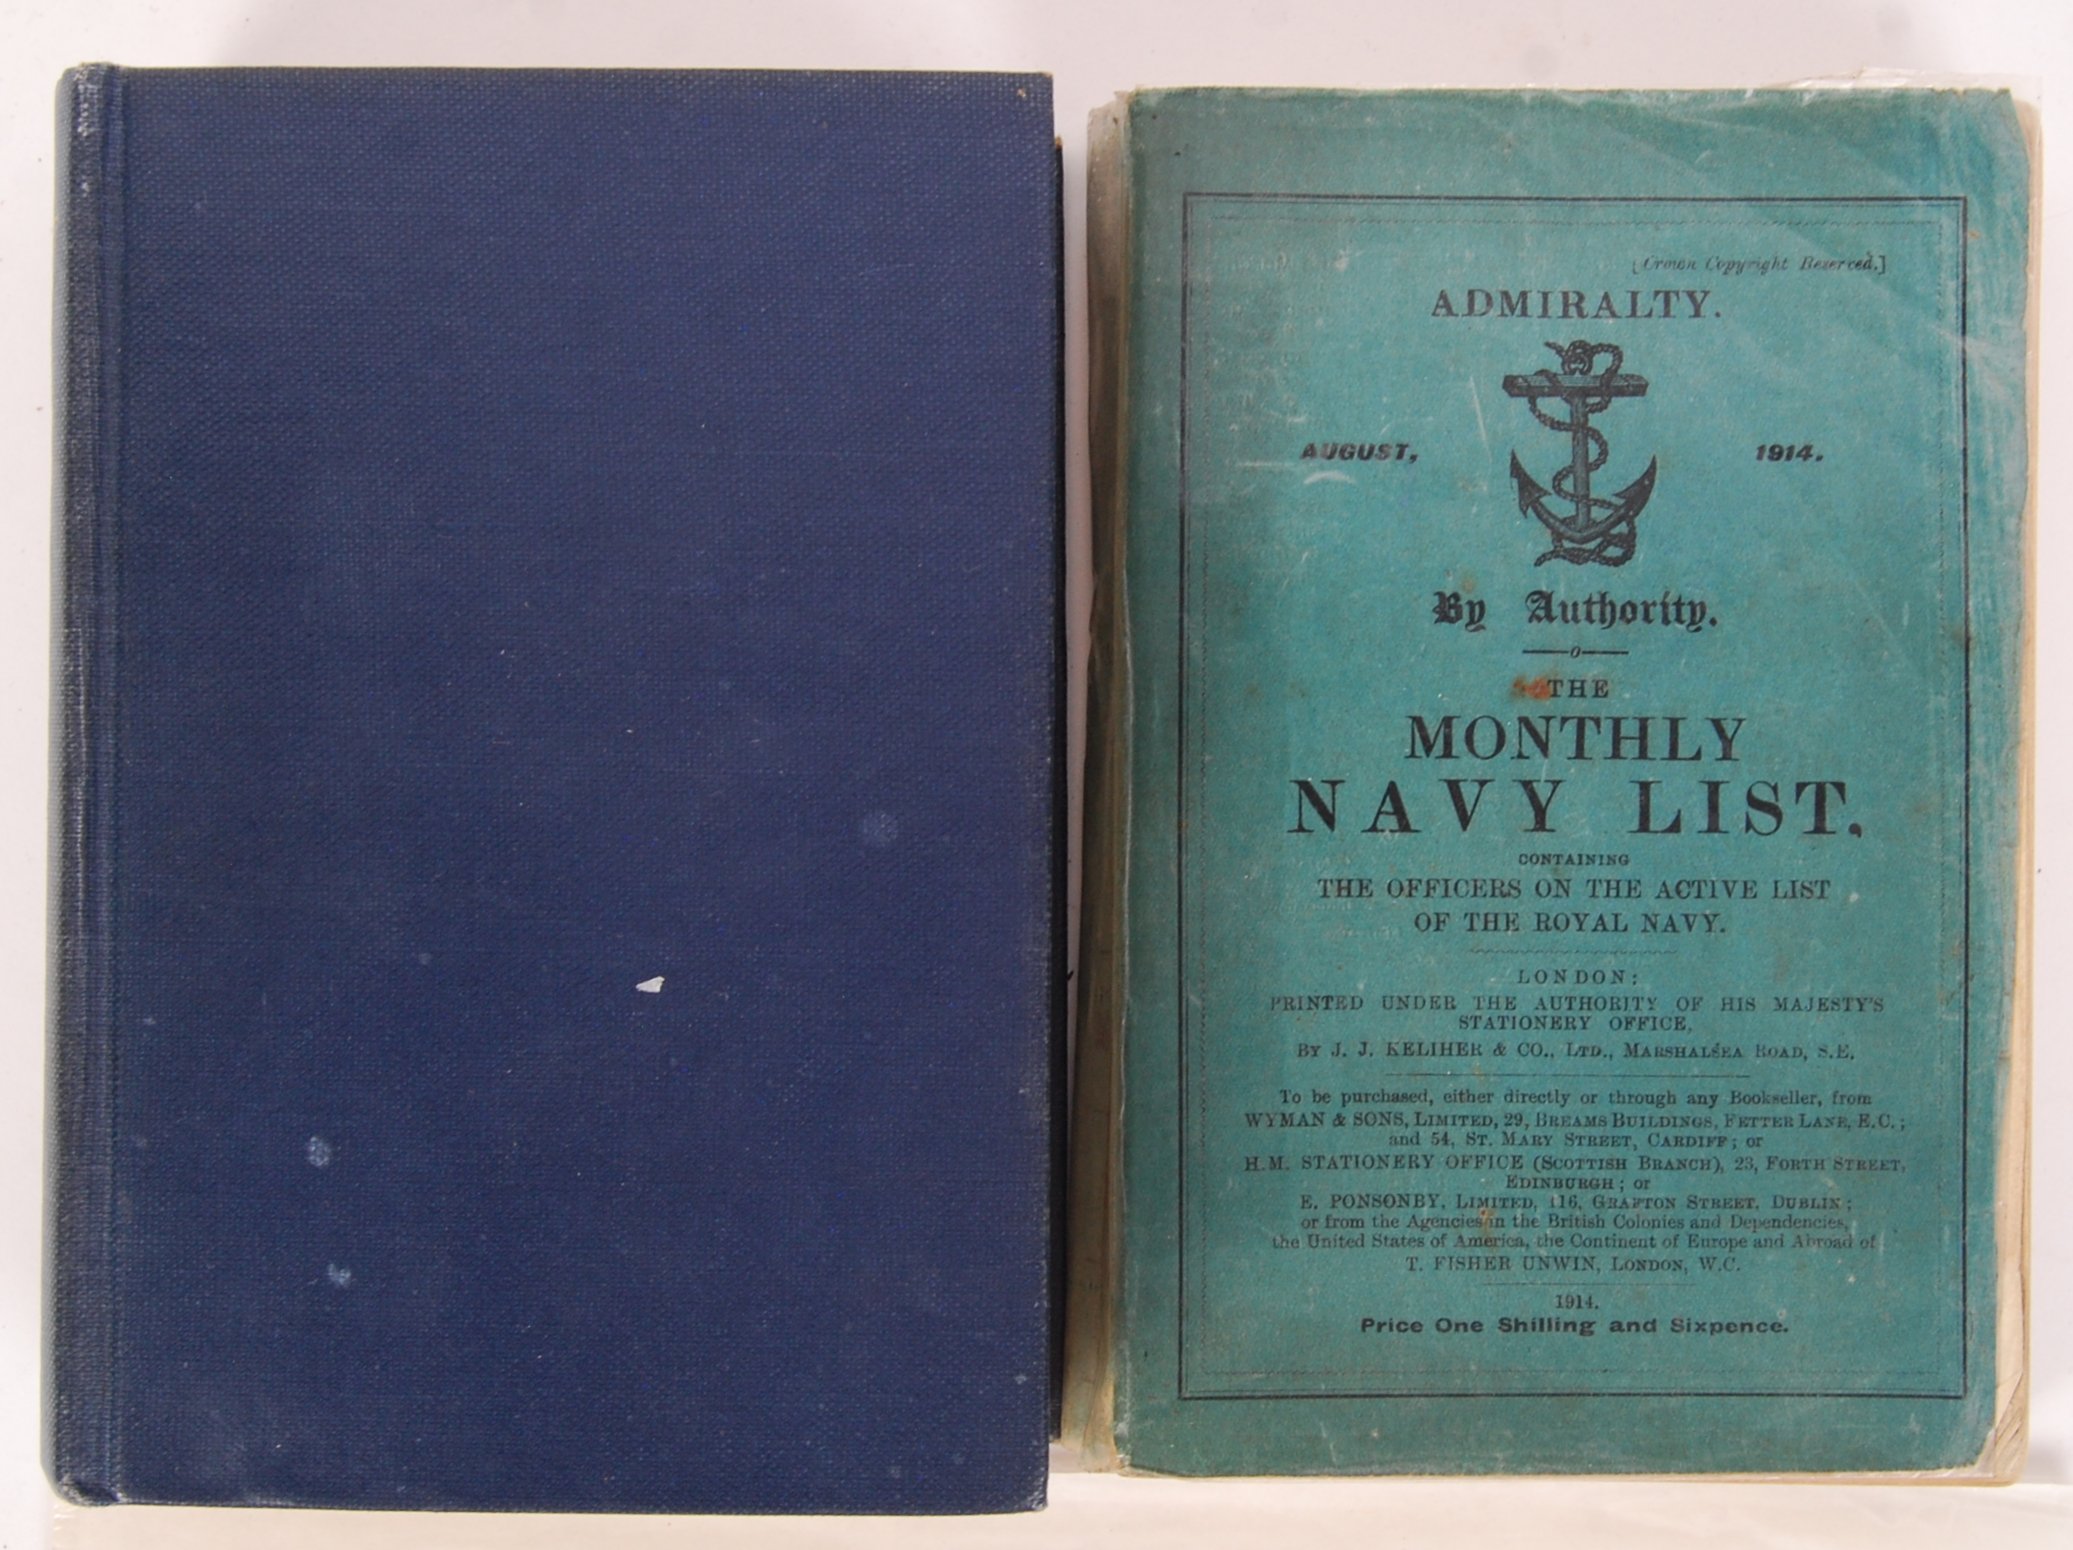 WWI FIRST WORLD WAR RELATED NAVAL & OTHER EPHEMERA - Image 2 of 4